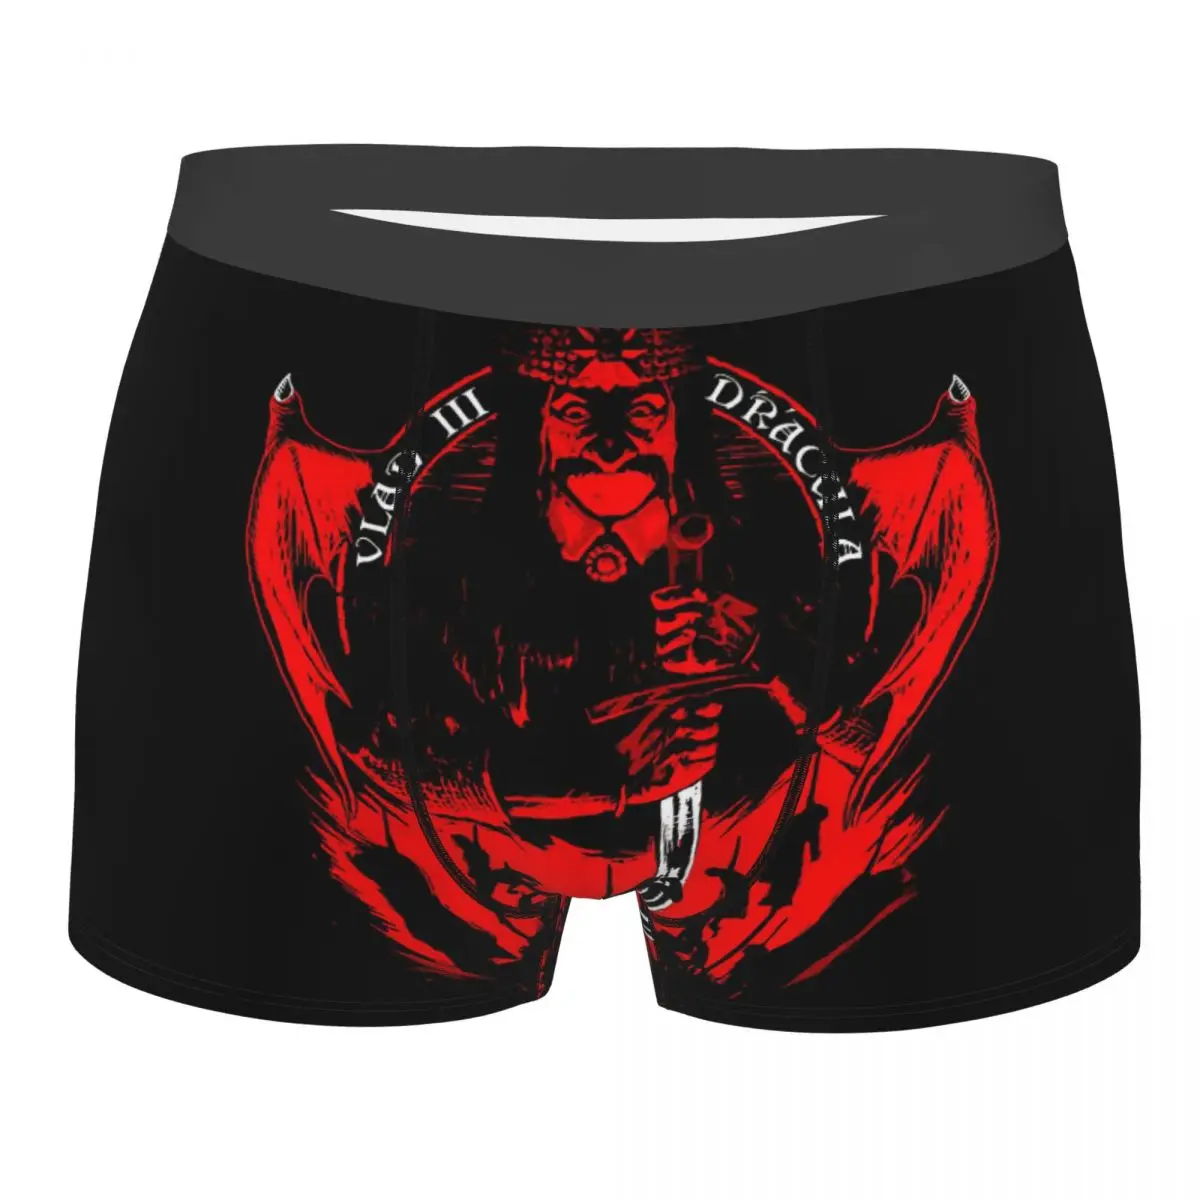 Vlad The Impaler Dracula Man'scosy Boxer Briefs Underwear Highly Breathable High Quality Gift Idea